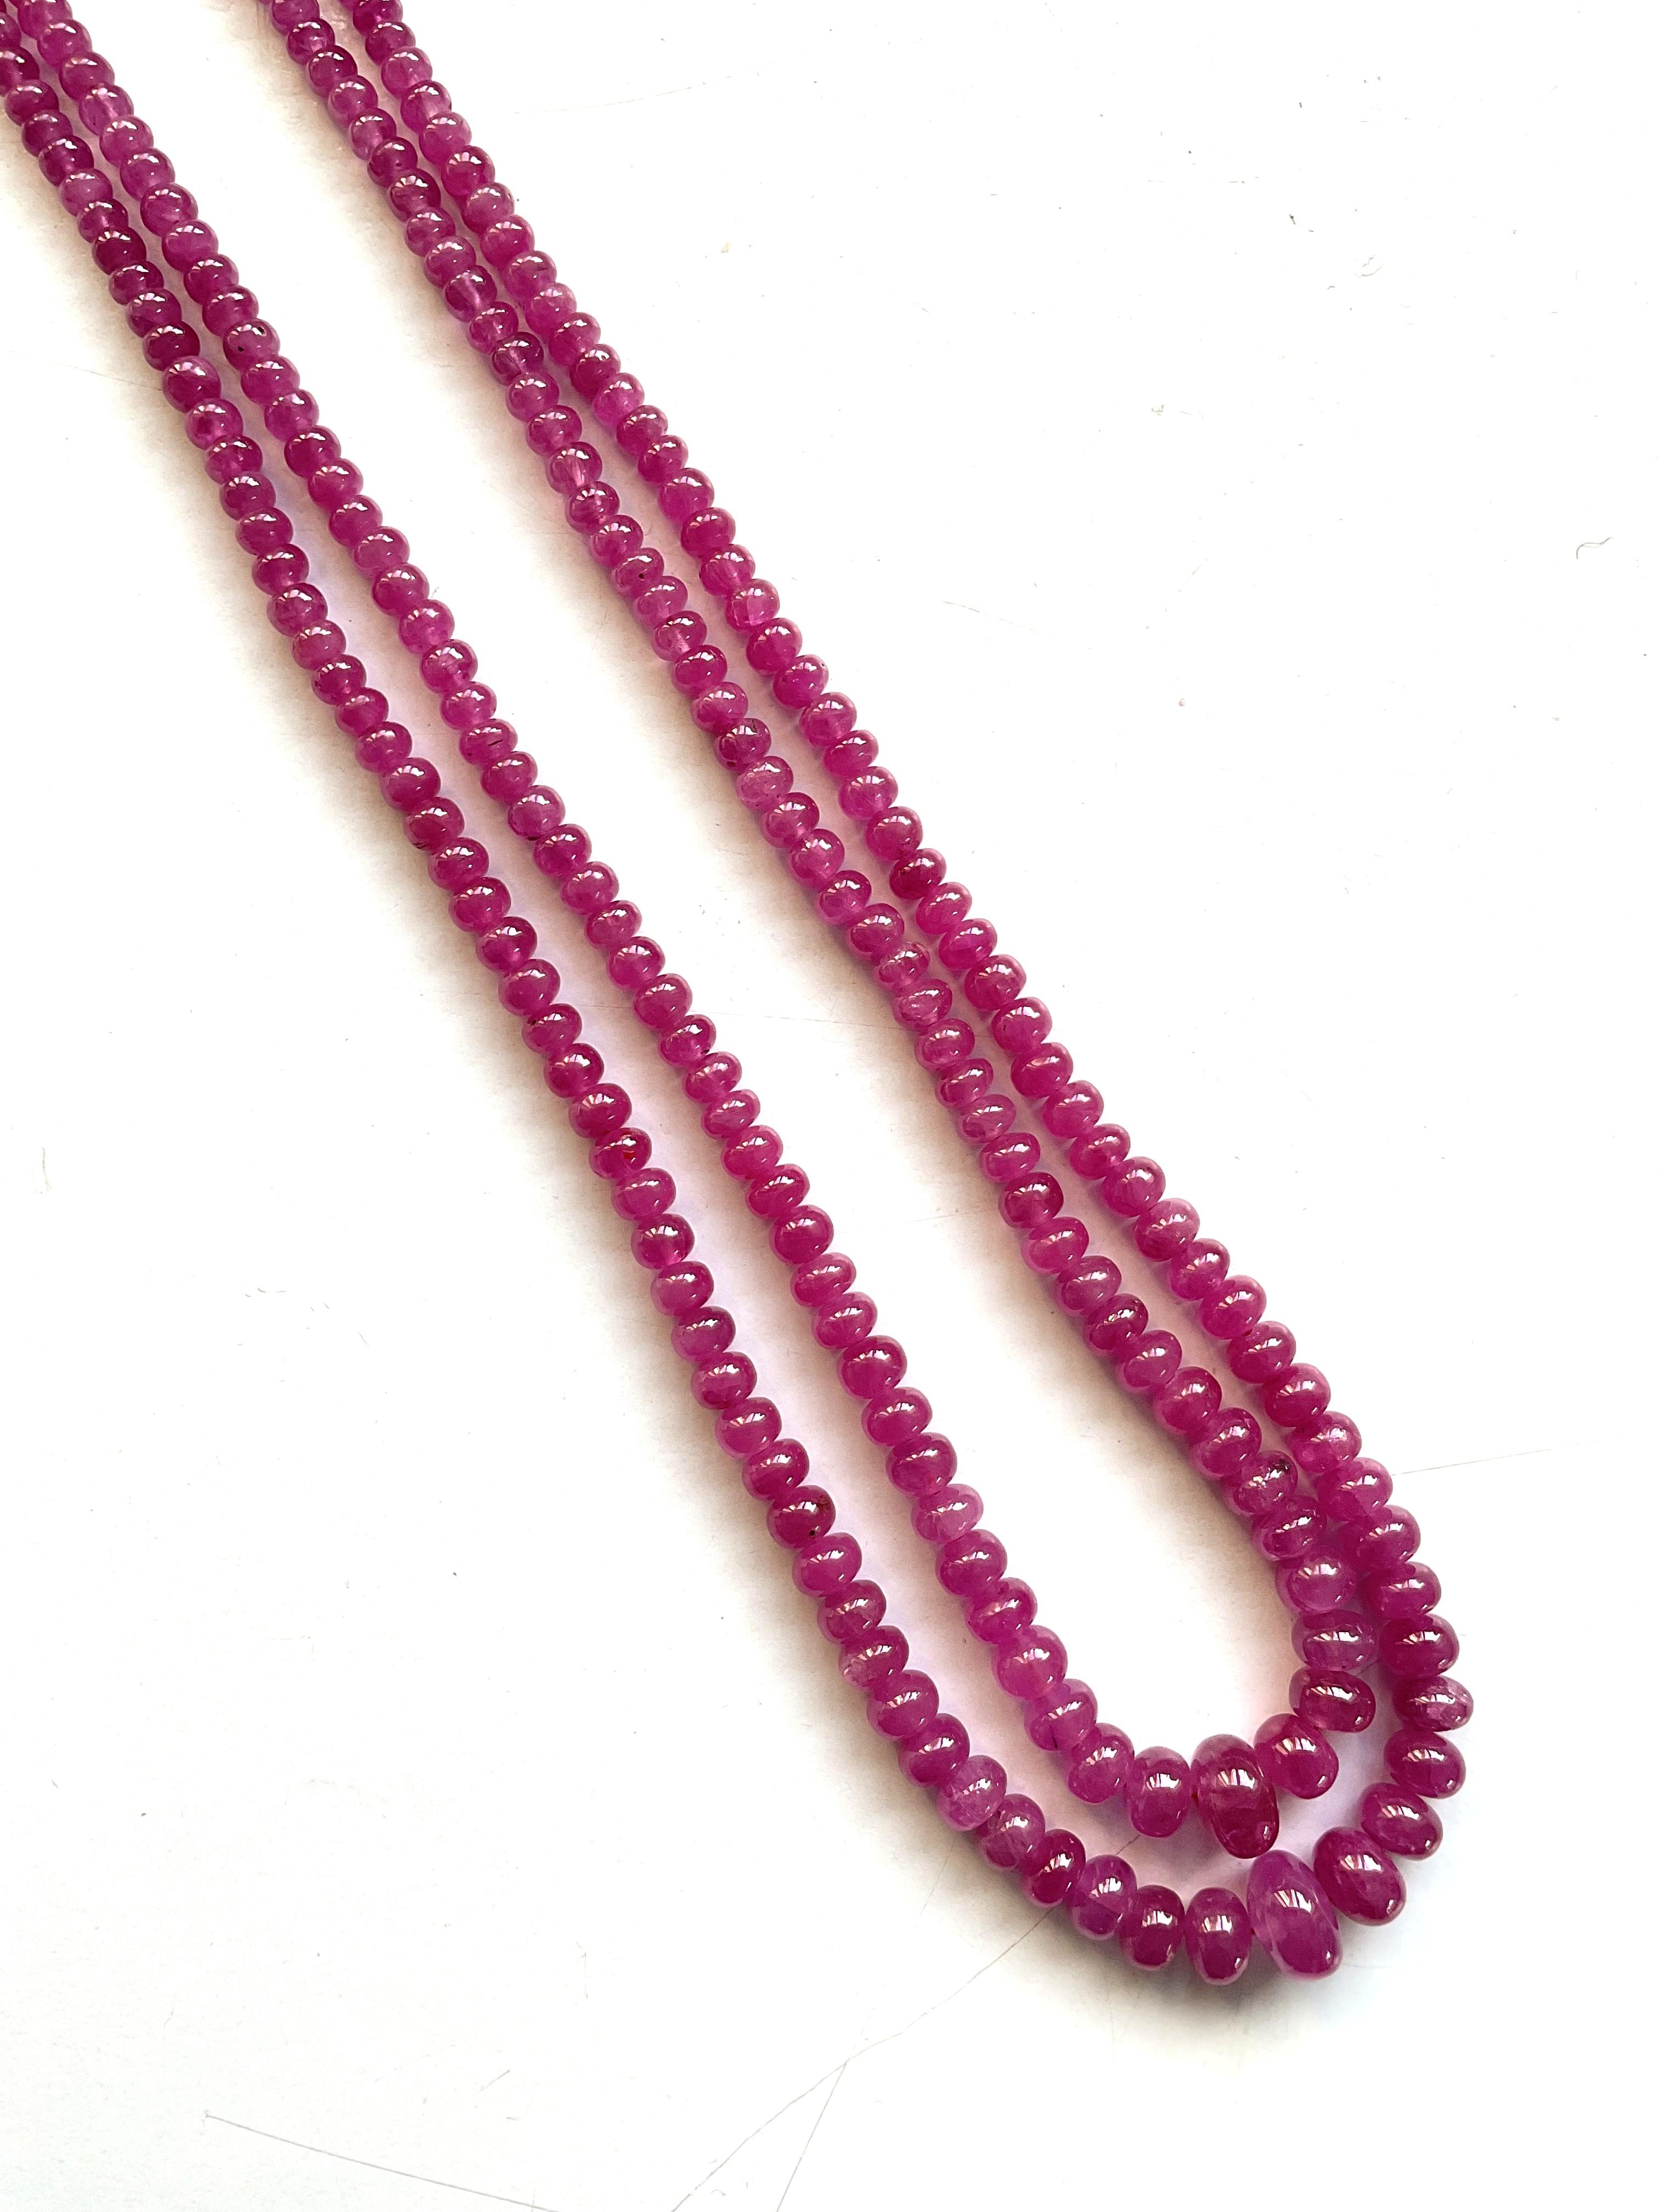 179.32 Carats Burma Ruby Heated Beaded Necklace Top Quality Natural Gemstone 4